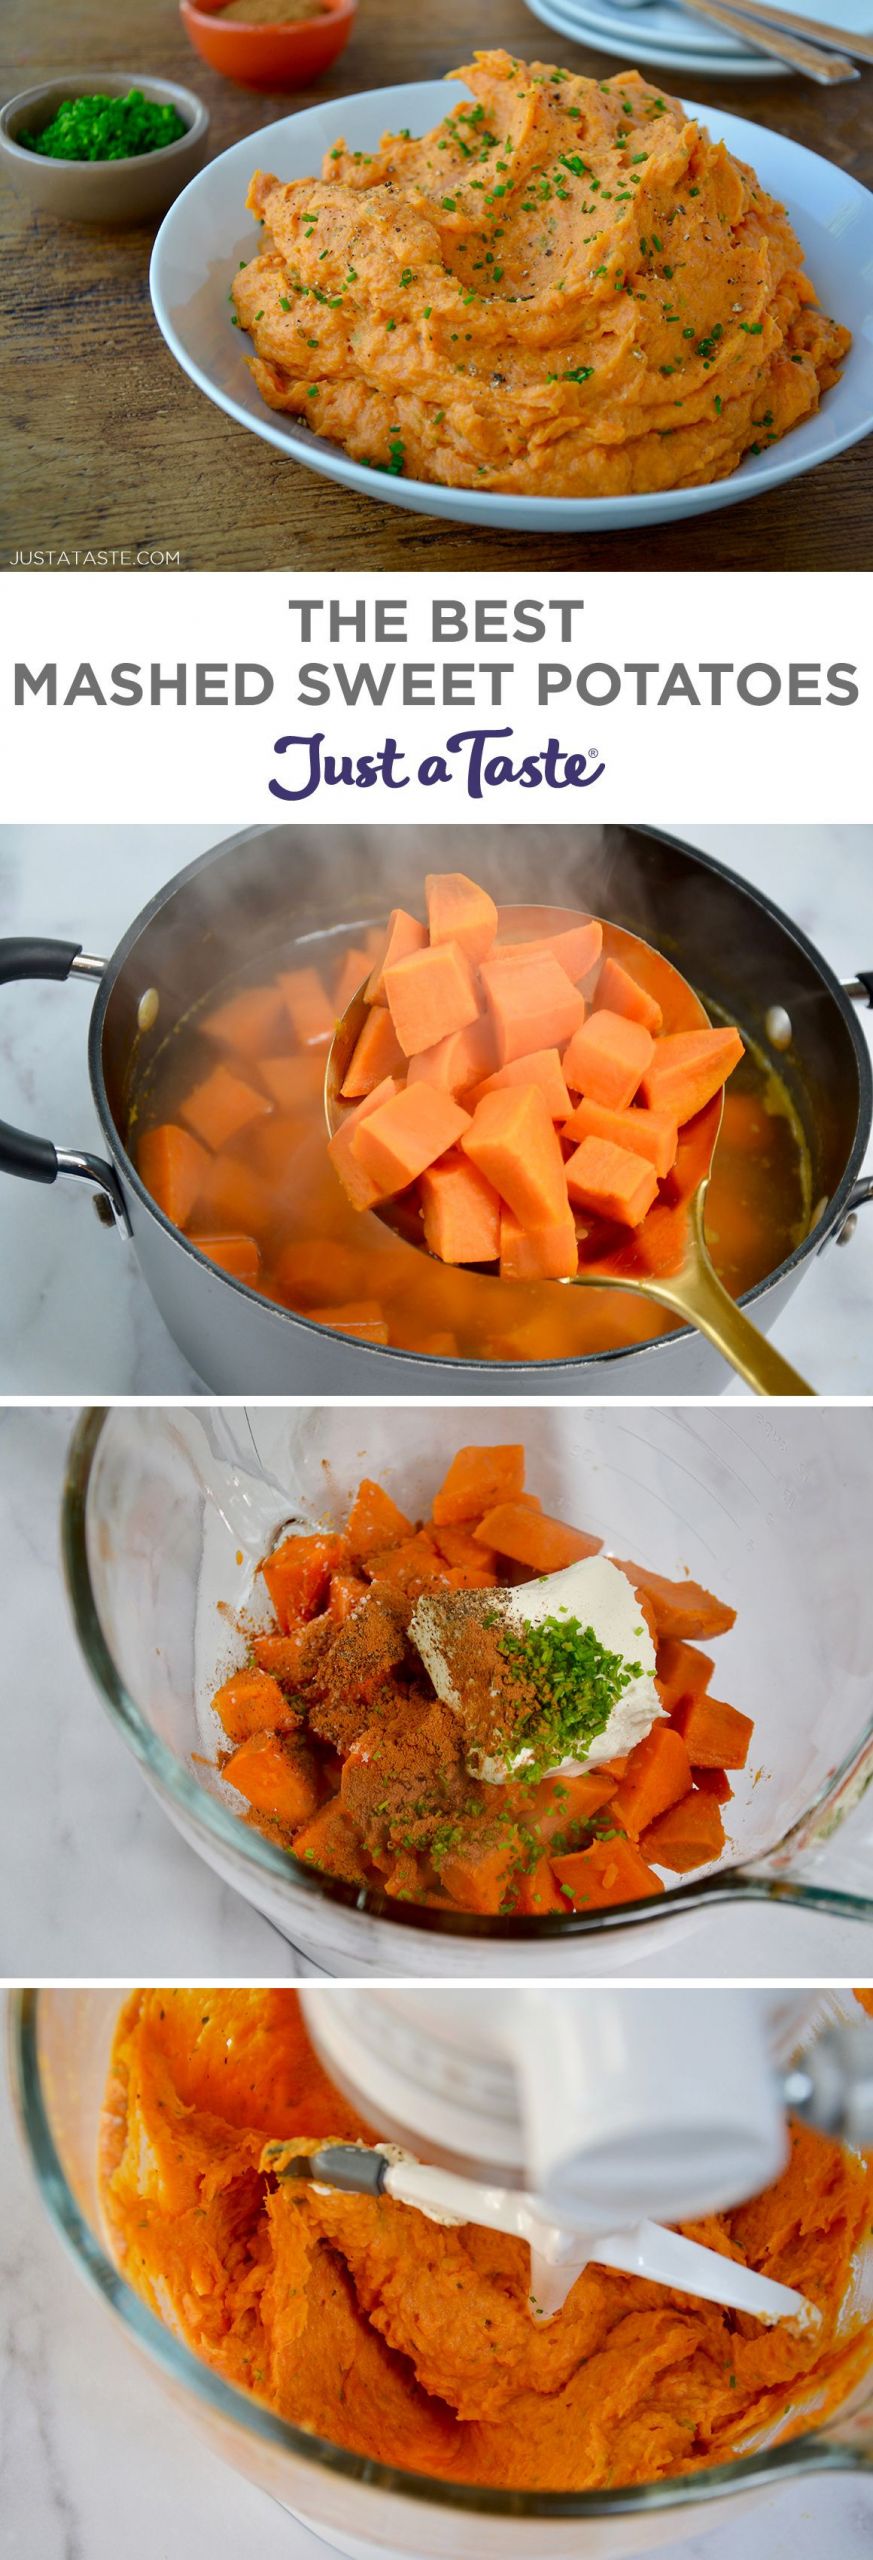 Make Ahead Mashed Sweet Potatoes
 This is the ultimate recipe for The Best Mashed Sweet